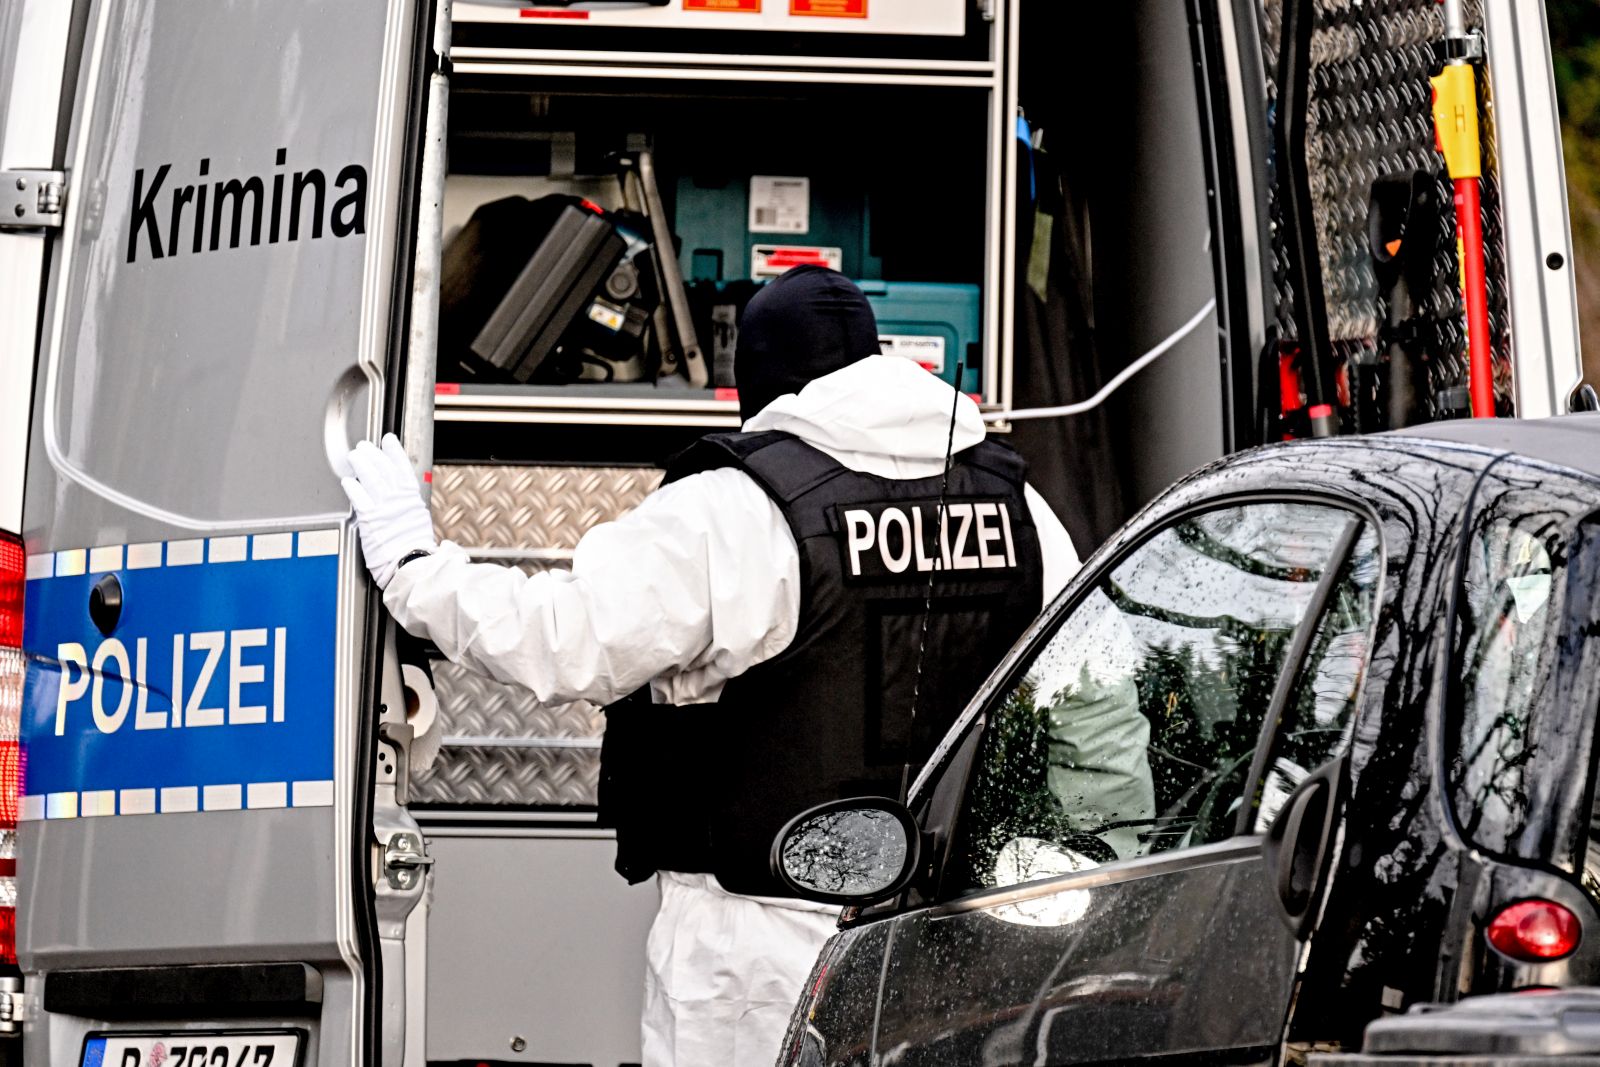 epa10353425 A police officer works during a raid in Berlin, Germany, 07 December 2022. Twenty-five people allegedly affiliated to the so-called Reichs Citizens (Reichsbuerger) movement were arrested in raids across Germany on suspicion of plotting to overthrow the government, a spokesperson for the Federal Prosecutor's office said. A group of far-right and ex-military figures are suspected to have planned to storm the parliament building, the Reichstag, and seize power.  EPA/Filip Singer